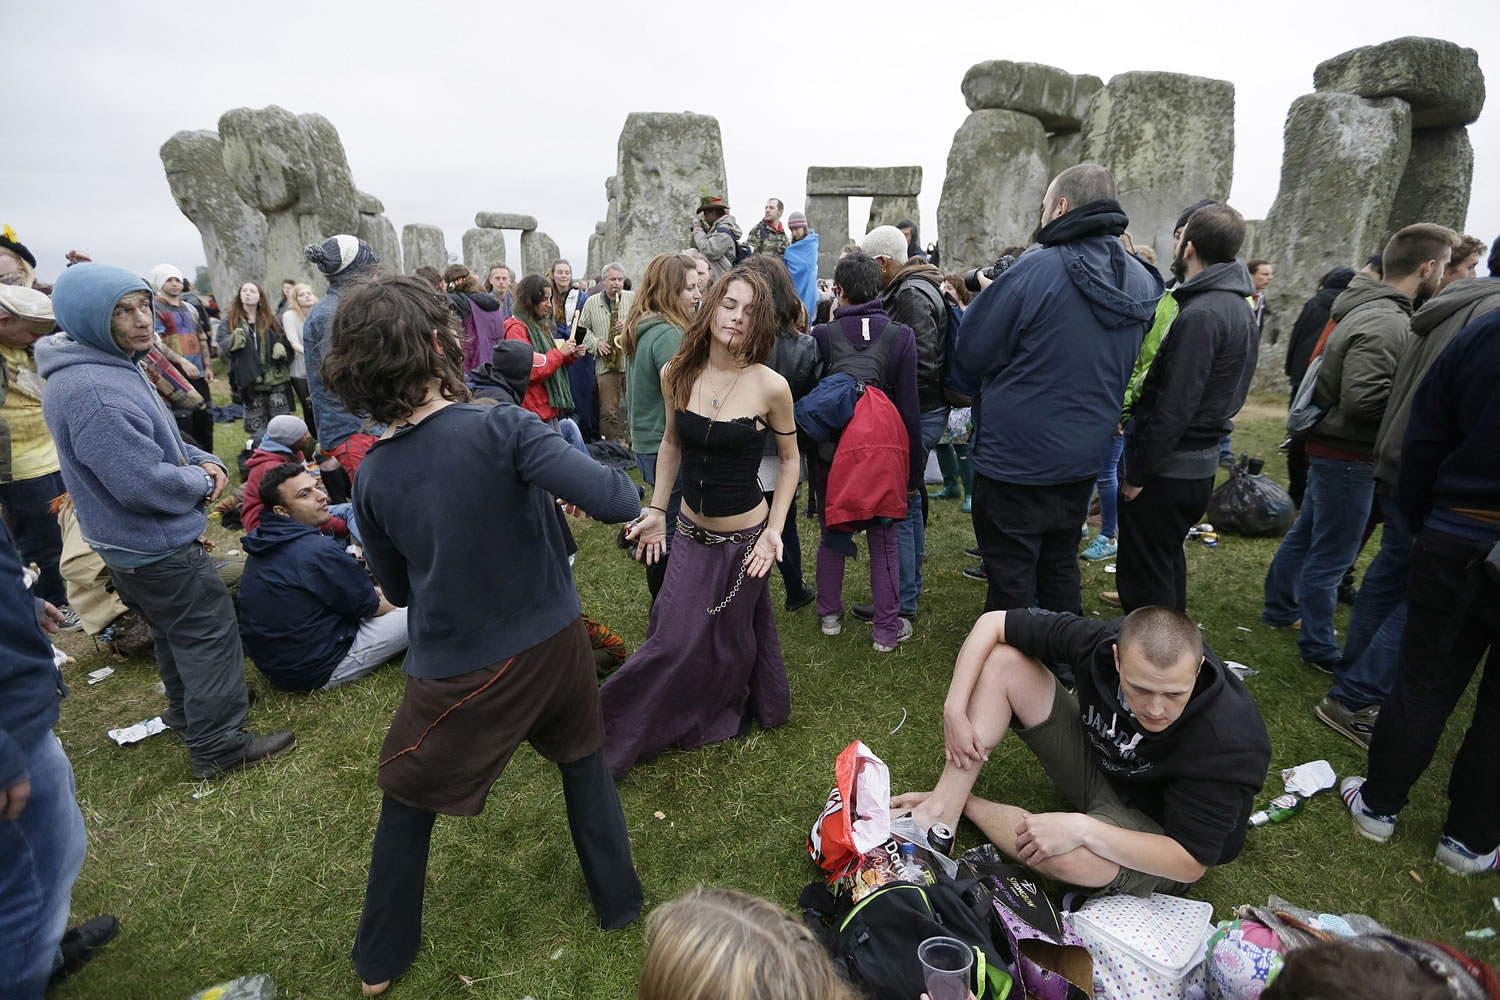 Thousands at Stonehenge mark summer solstice The Columbian